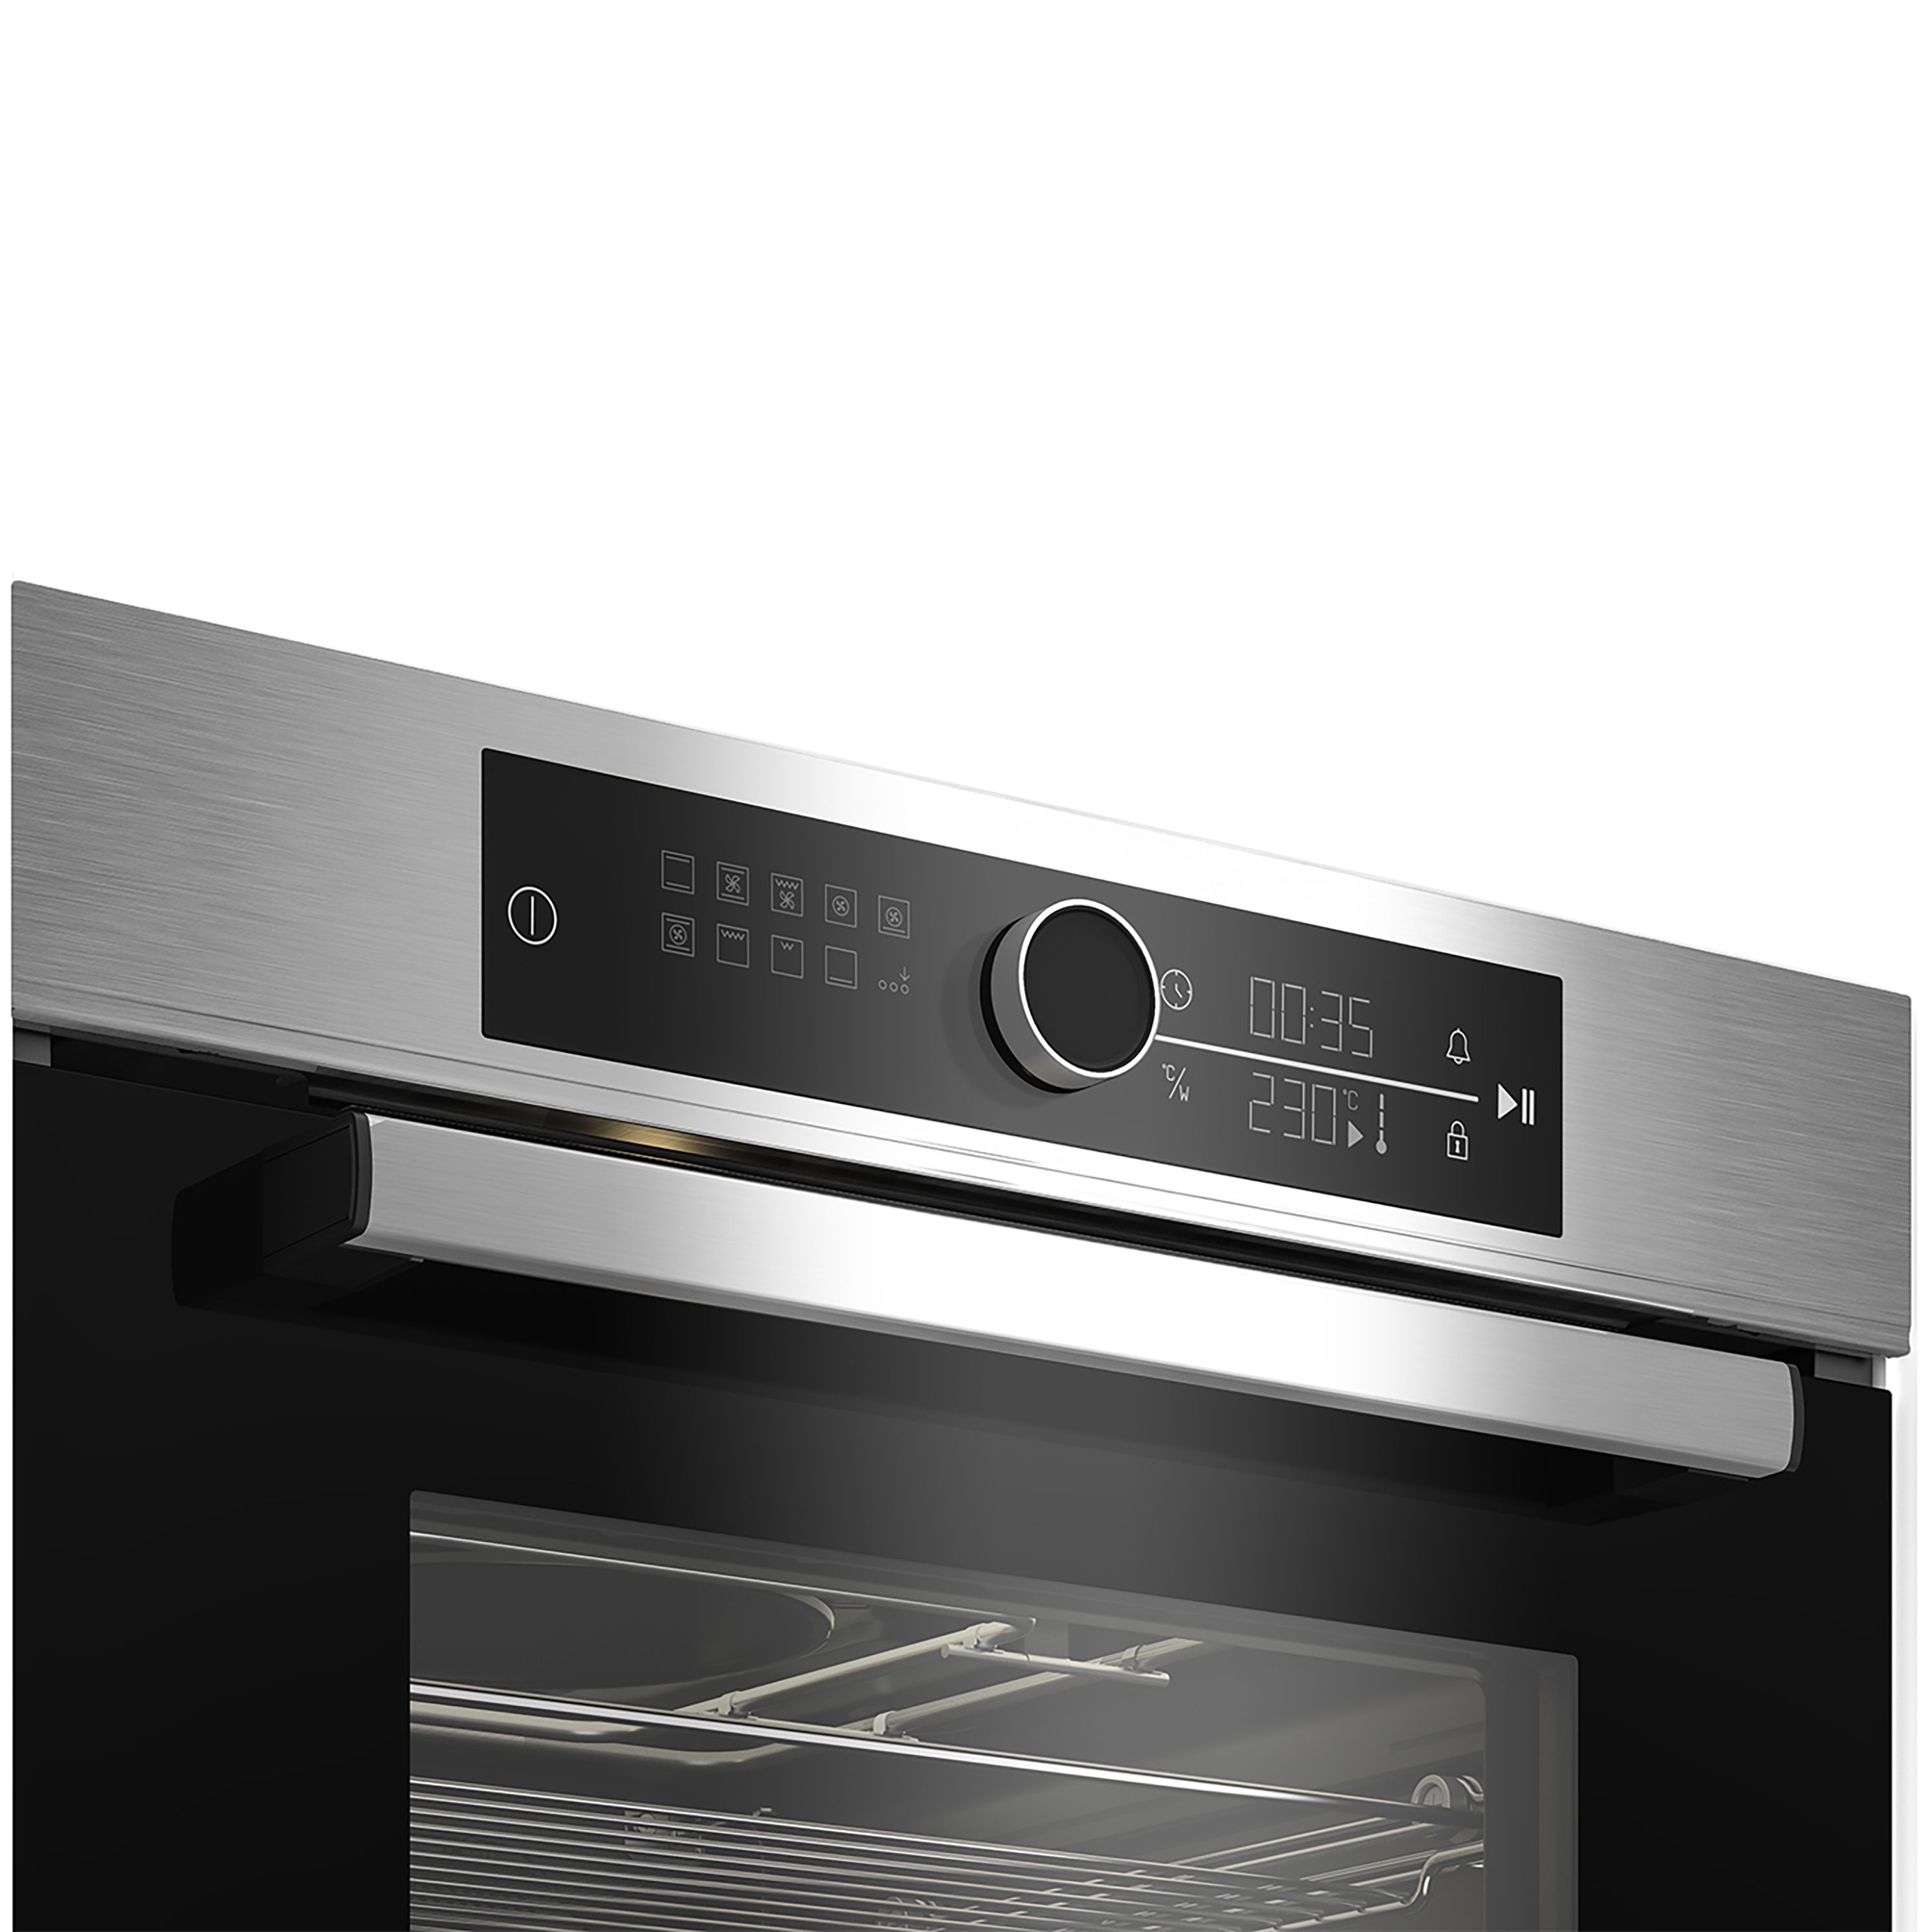 Beko BBCW12400X Built-in Oven with microwave - Stainless steel